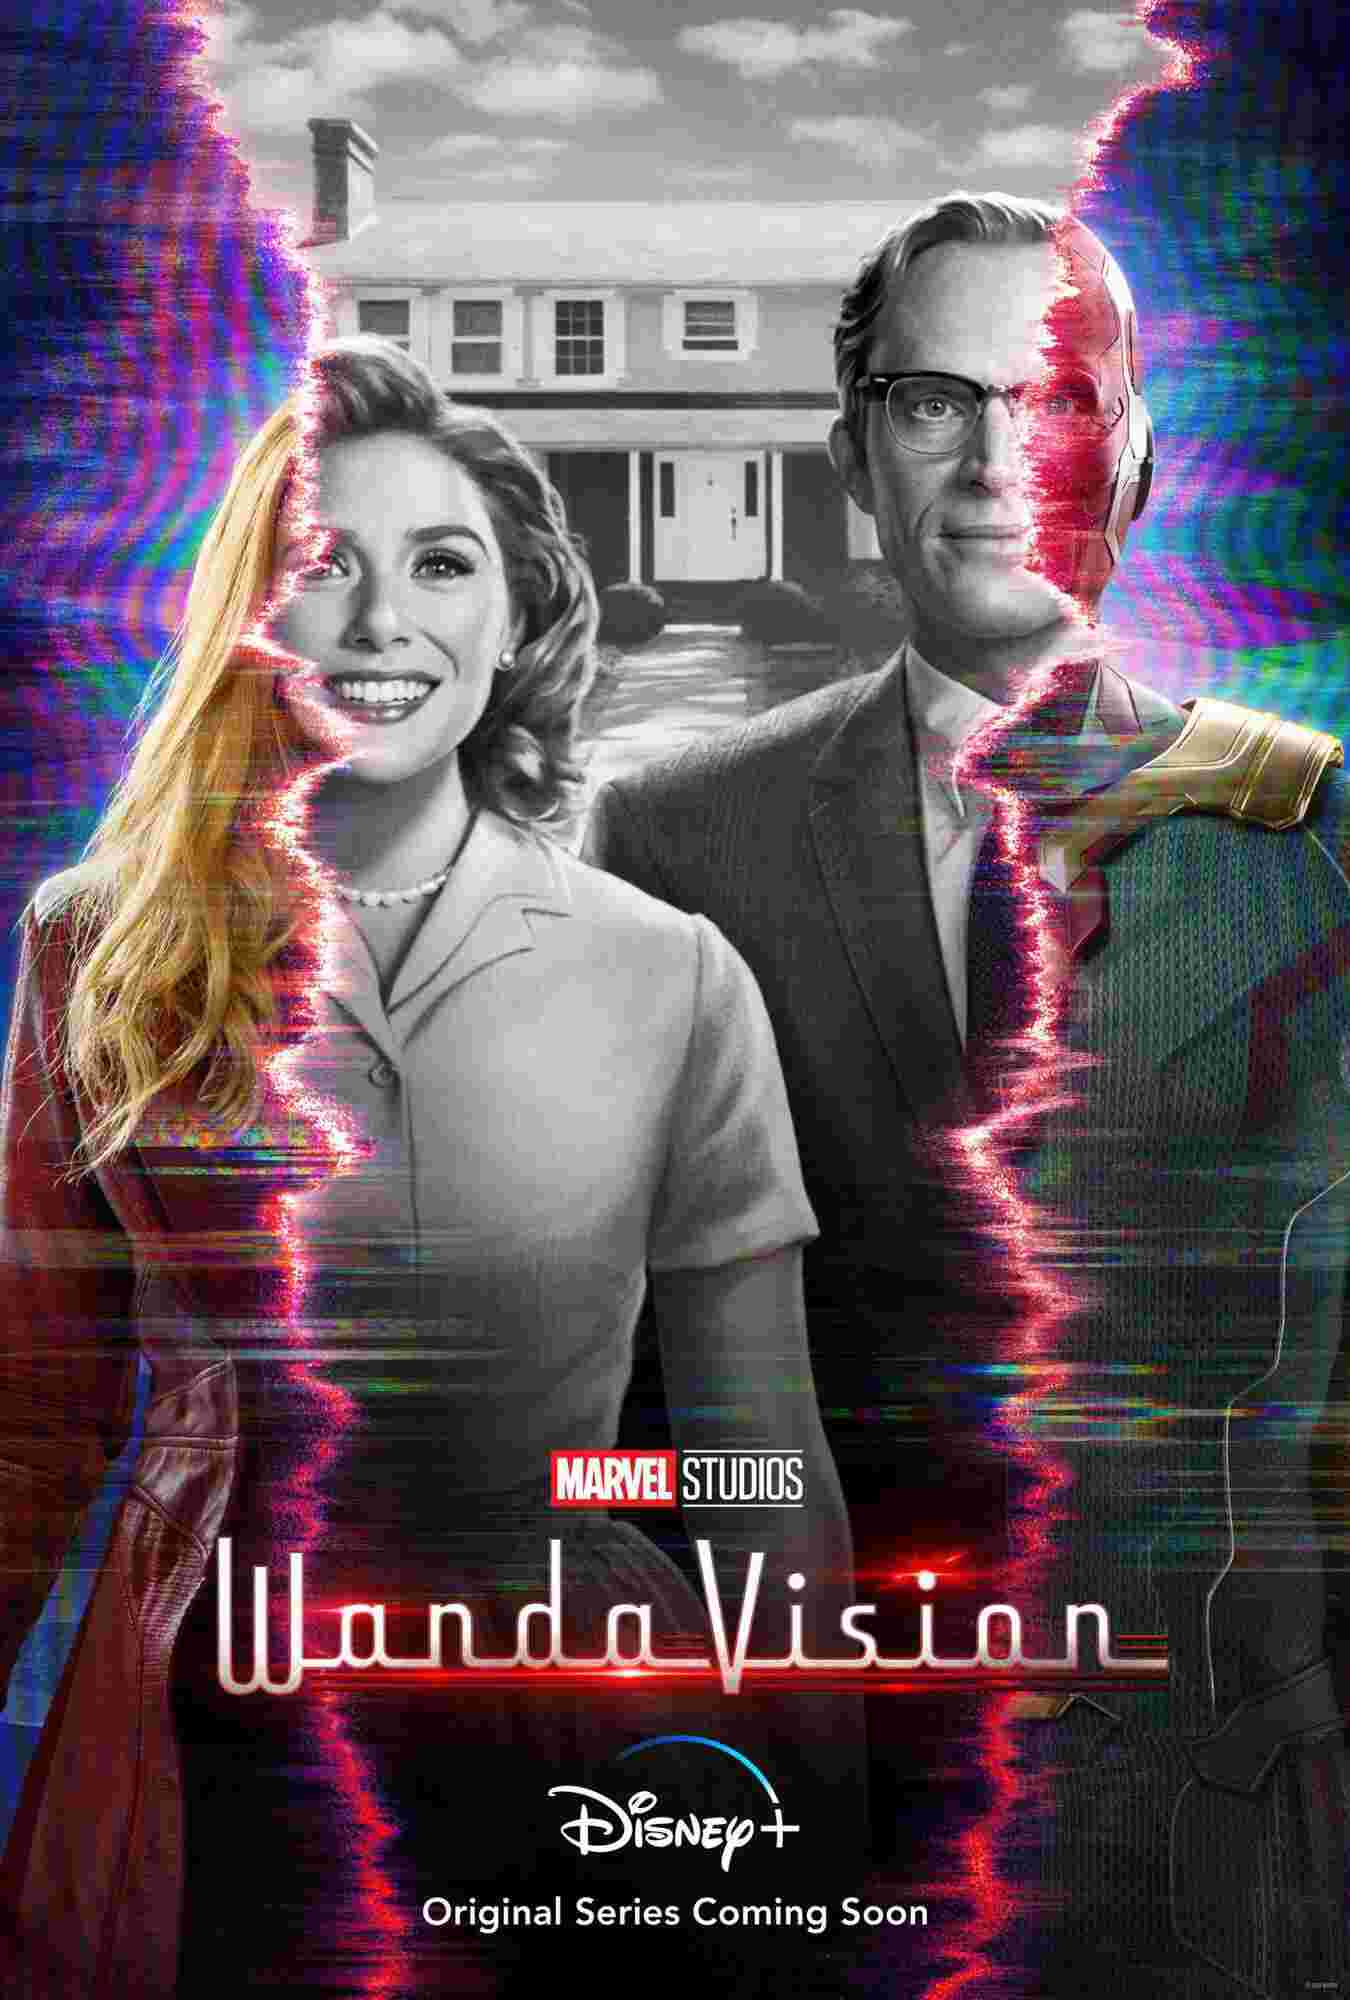 Wandavision series all episodes download in hindi by